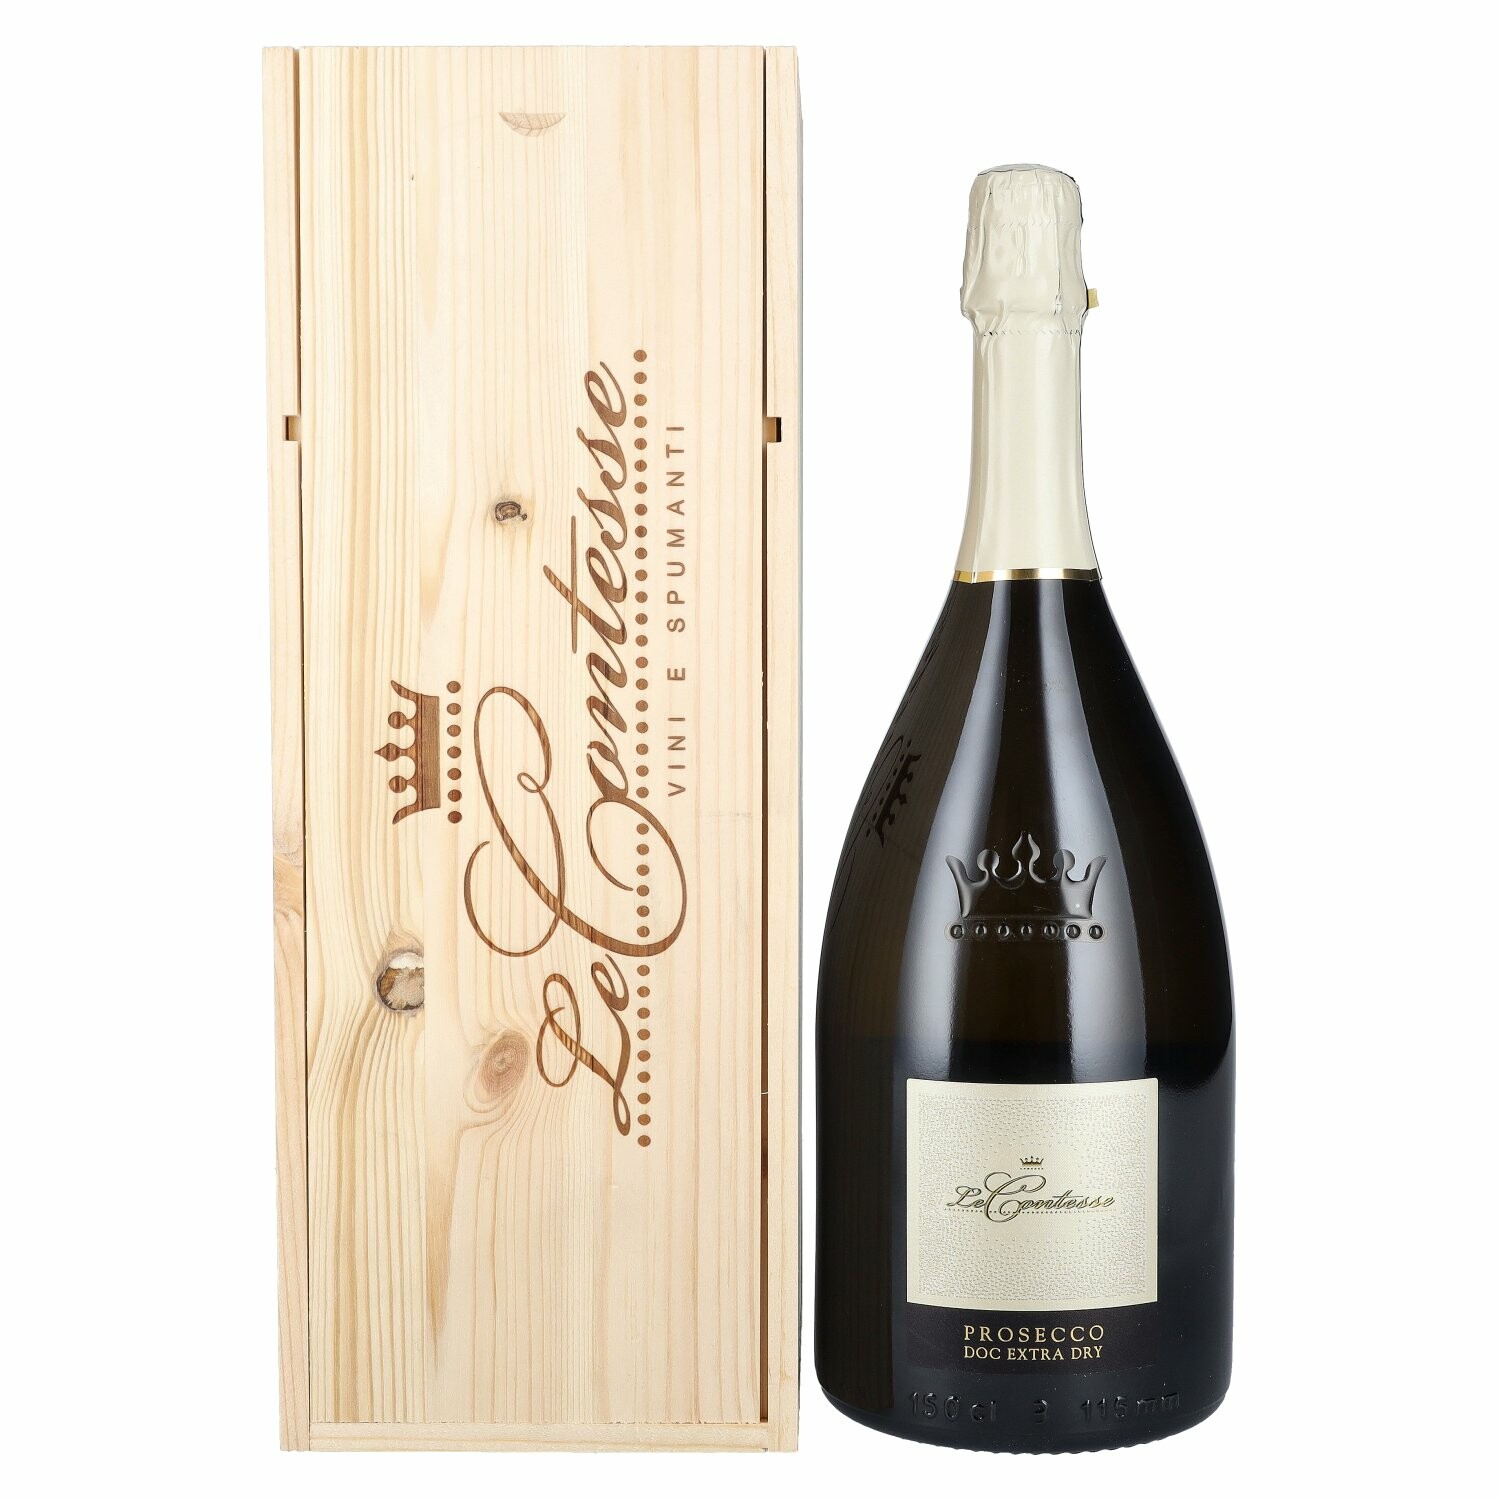 Le Contesse Prosecco DOC Extra Dry 11% Vol. 1,5l in Holzkiste